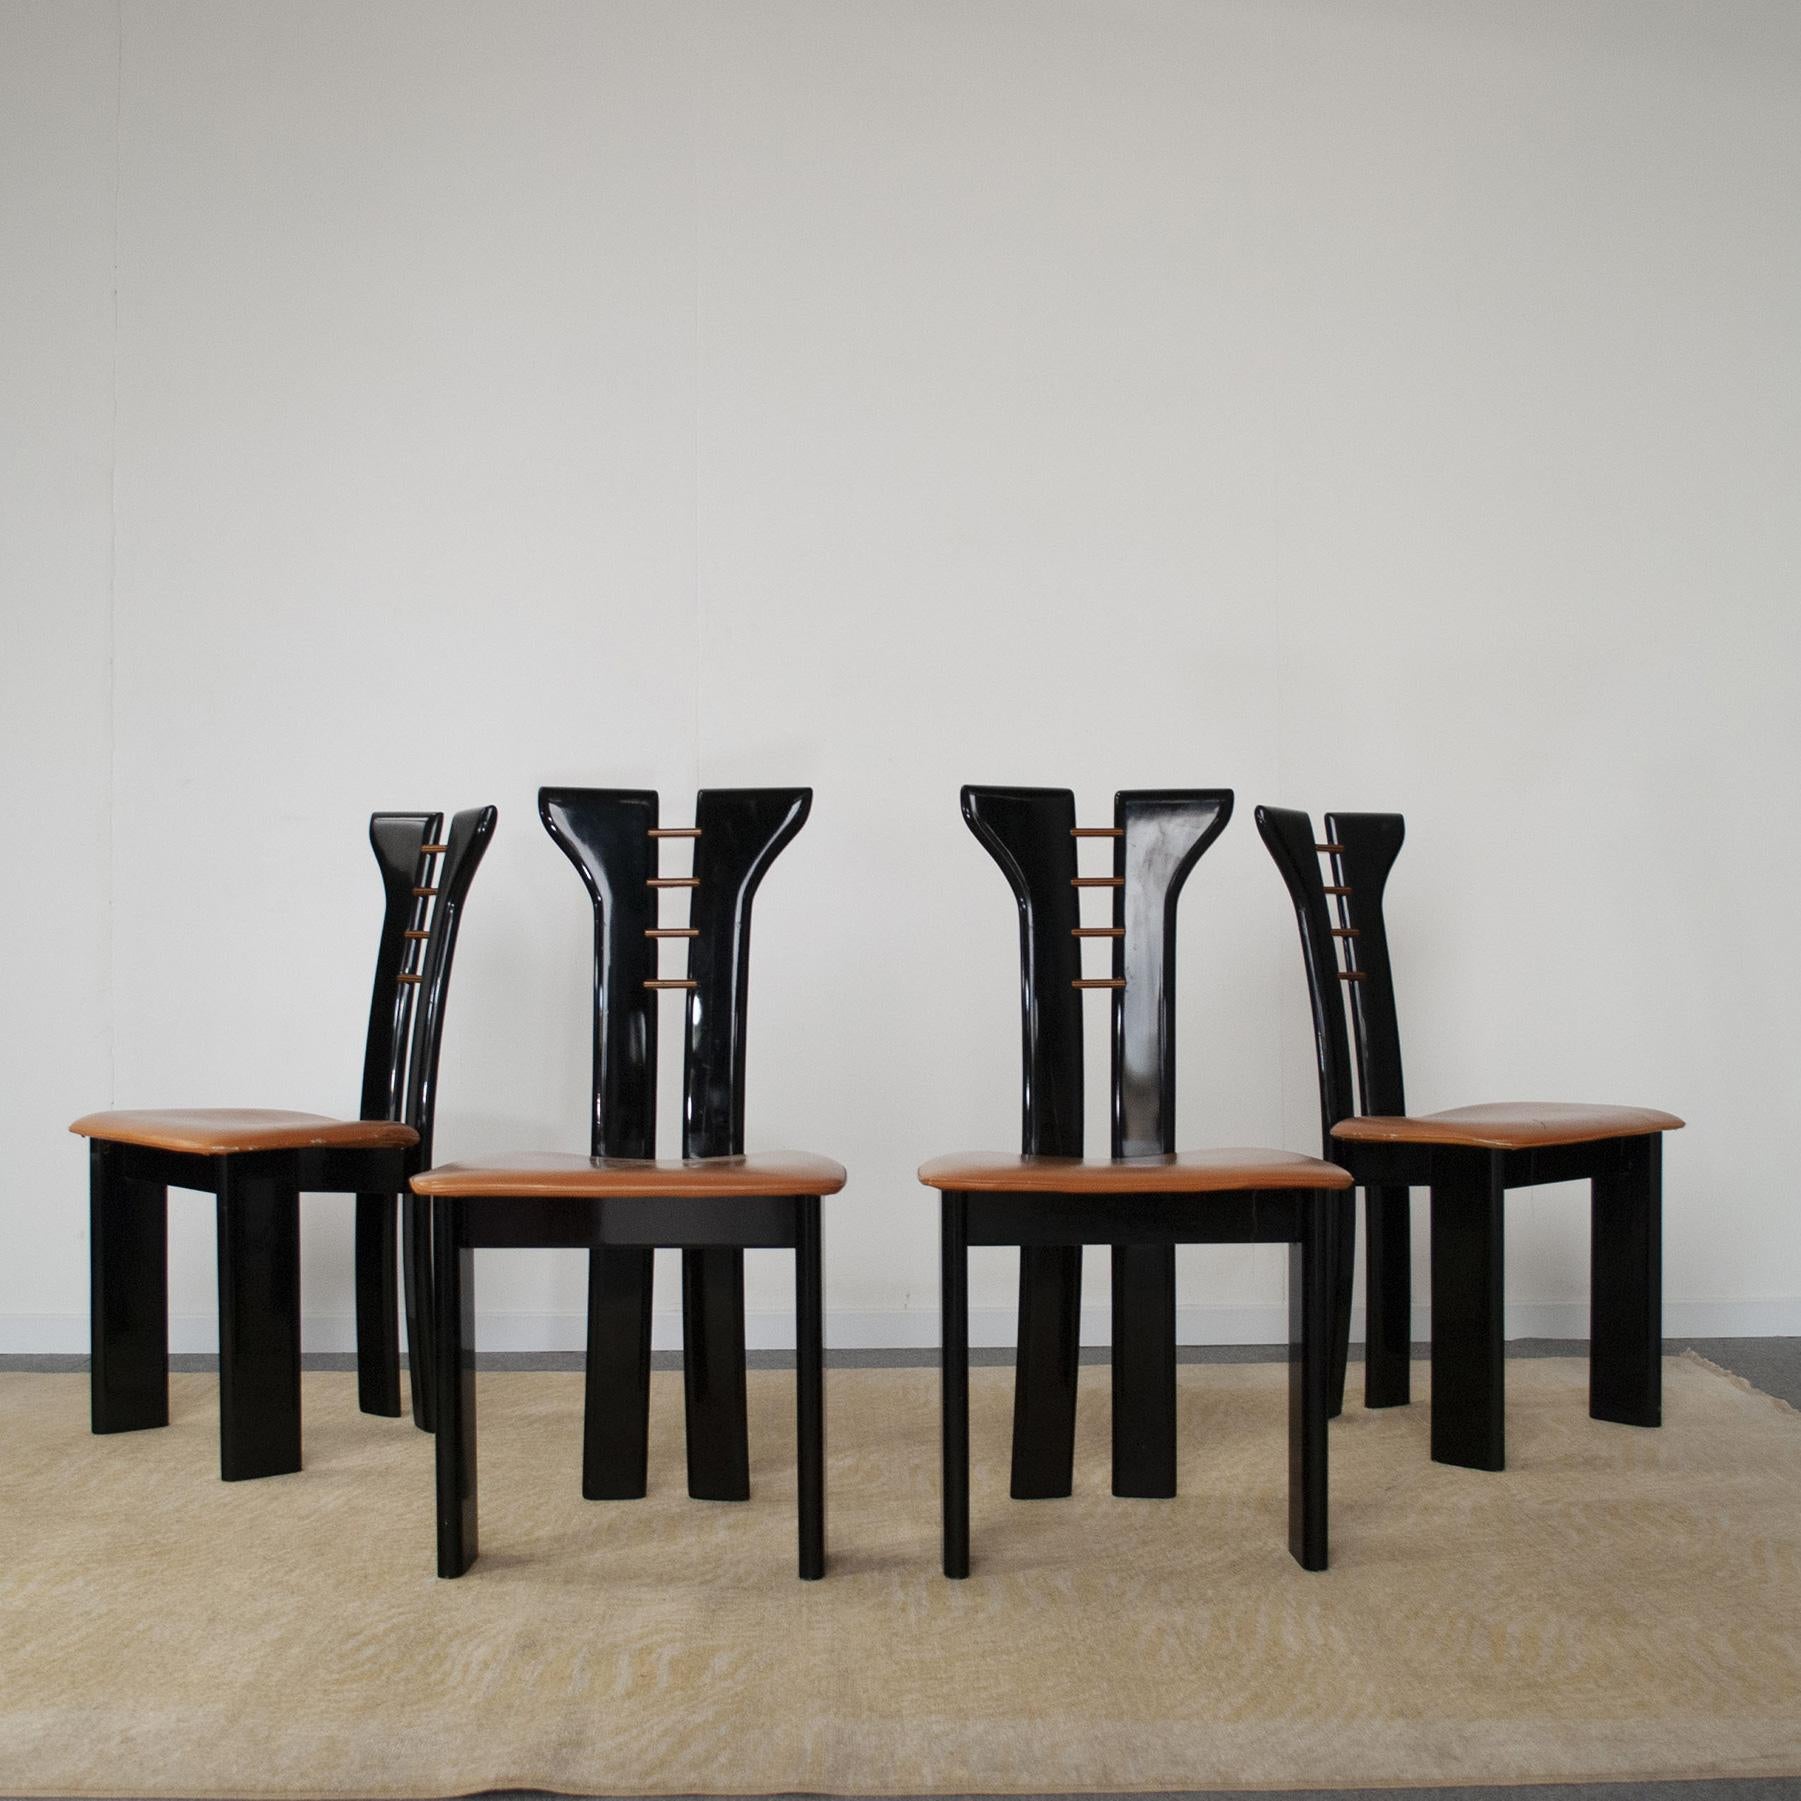 Set fo four chairs by French designer Pierre Cardin in black lacquered wood with cognac-colored leather seat French production late 70s.
The seats have lacerations, they can be replaced with the same leather.